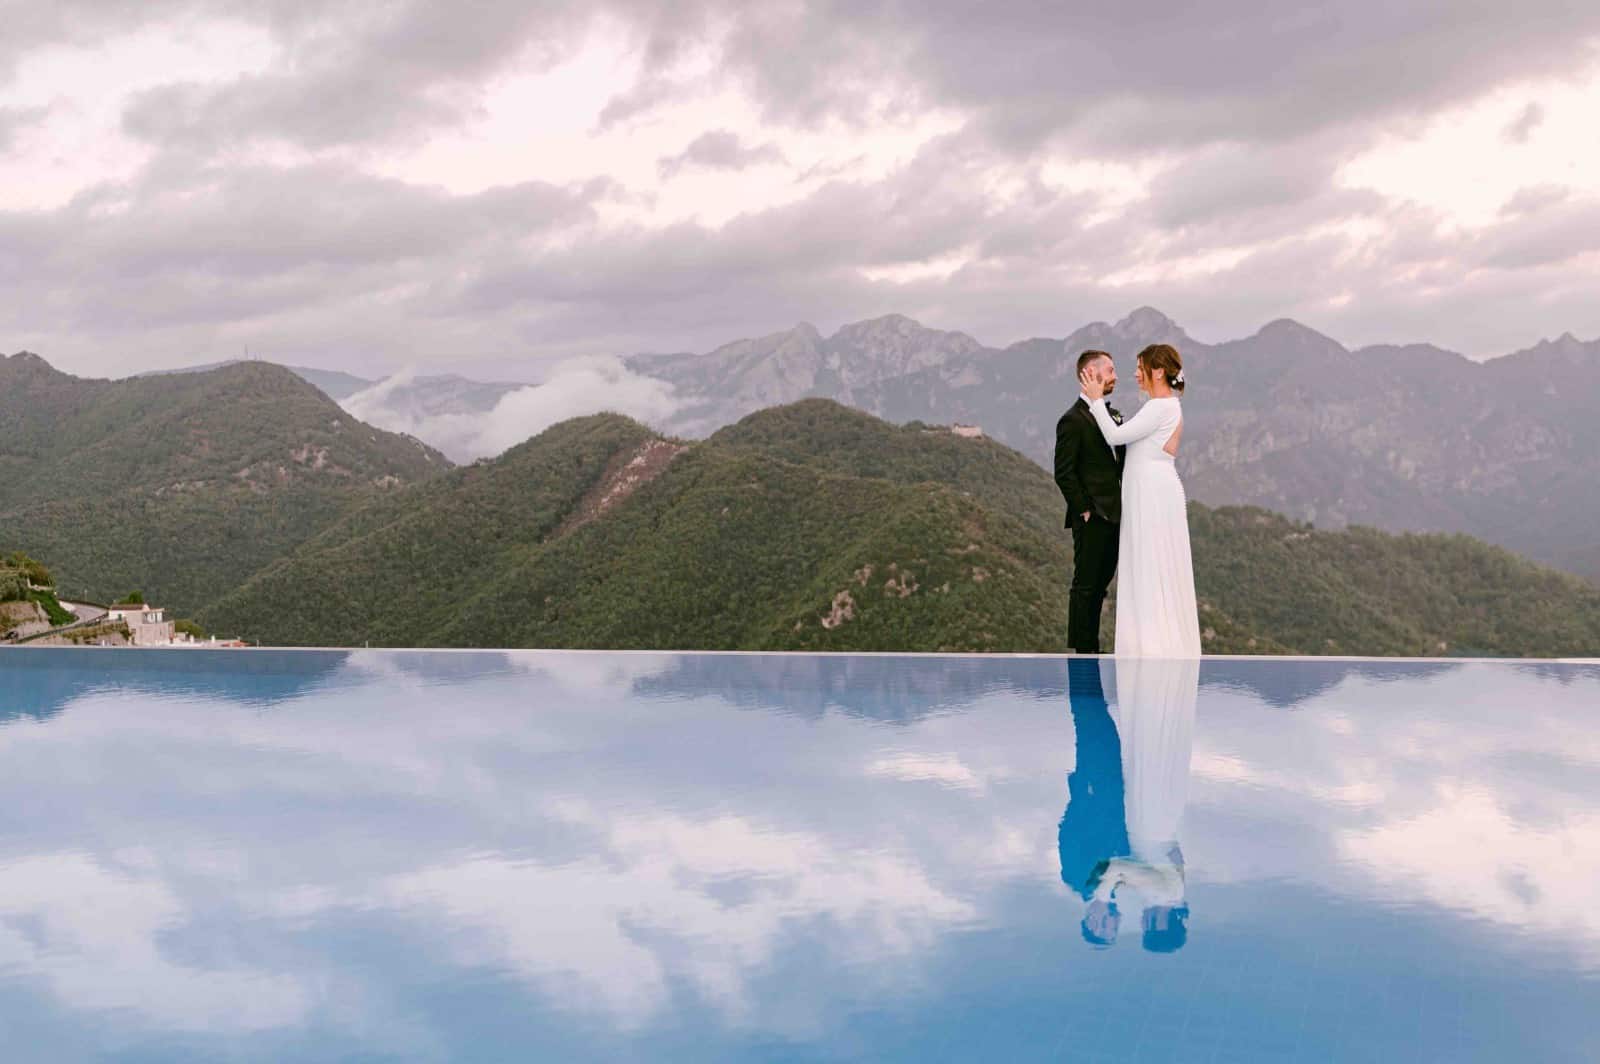 Spouses hug each other near the pool with a view of green hills behind them